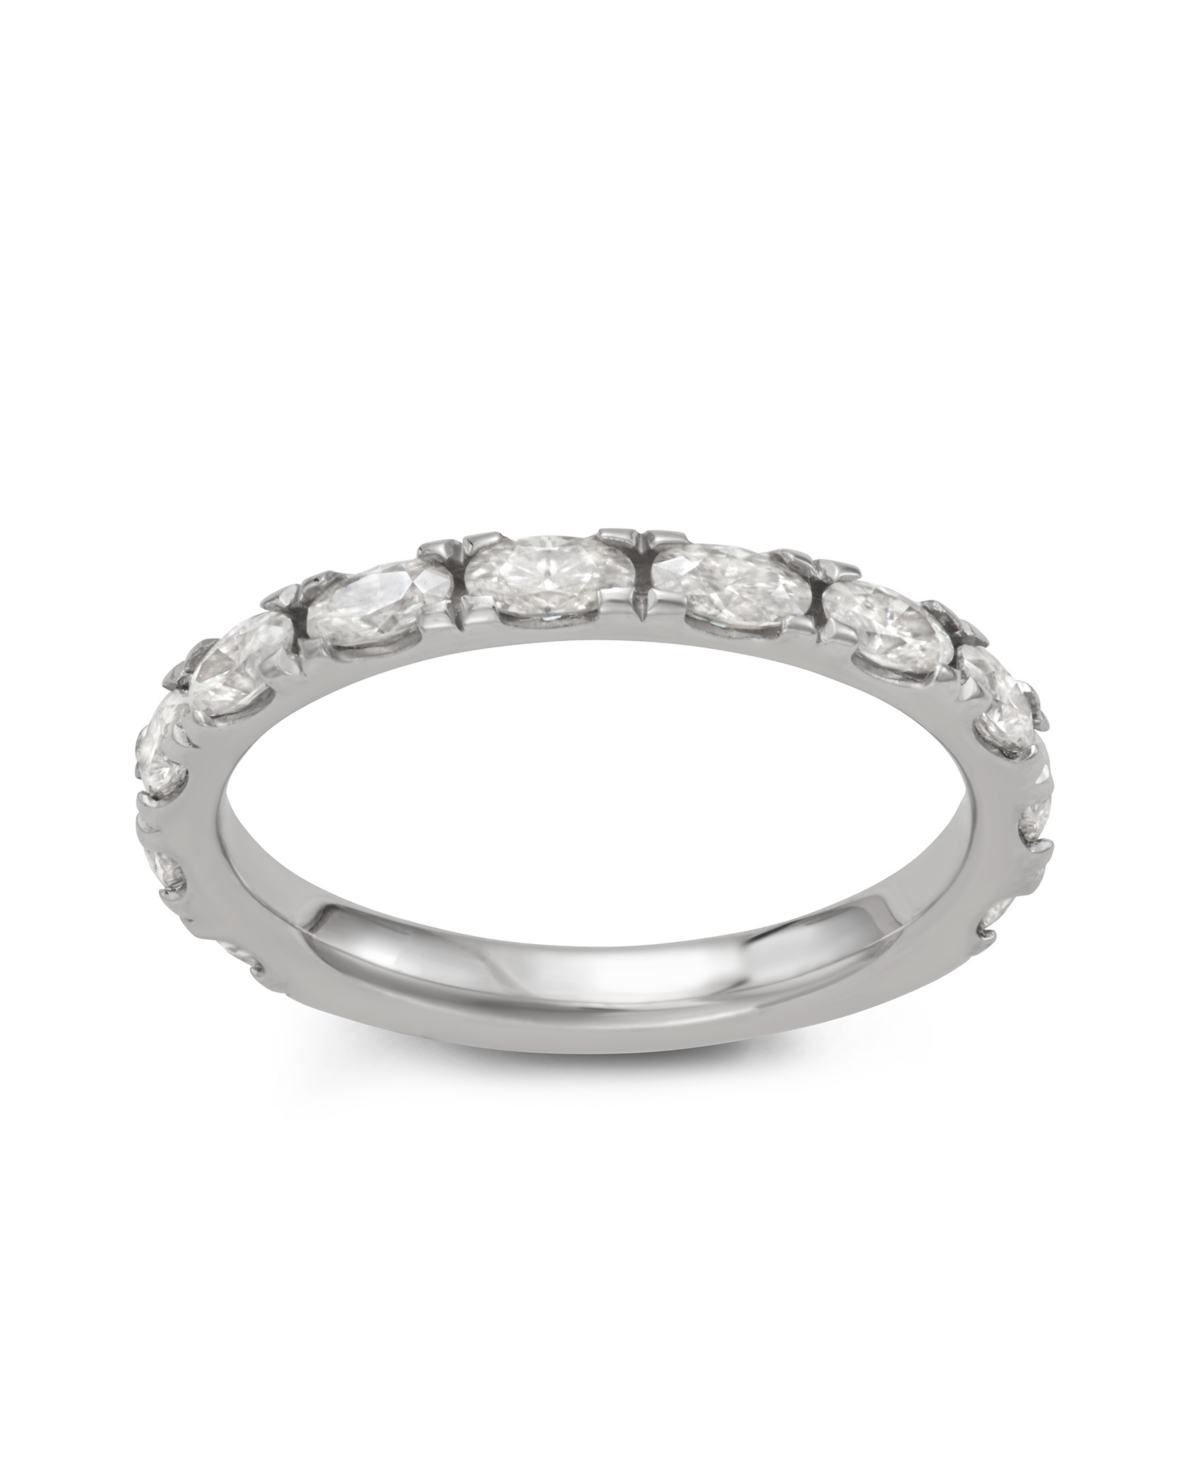 Moissanite Oval Cut Wedding Band (1 1/10 ct. t.w. Diamond Equivalent) in Sterling Silver - Sterling Silver